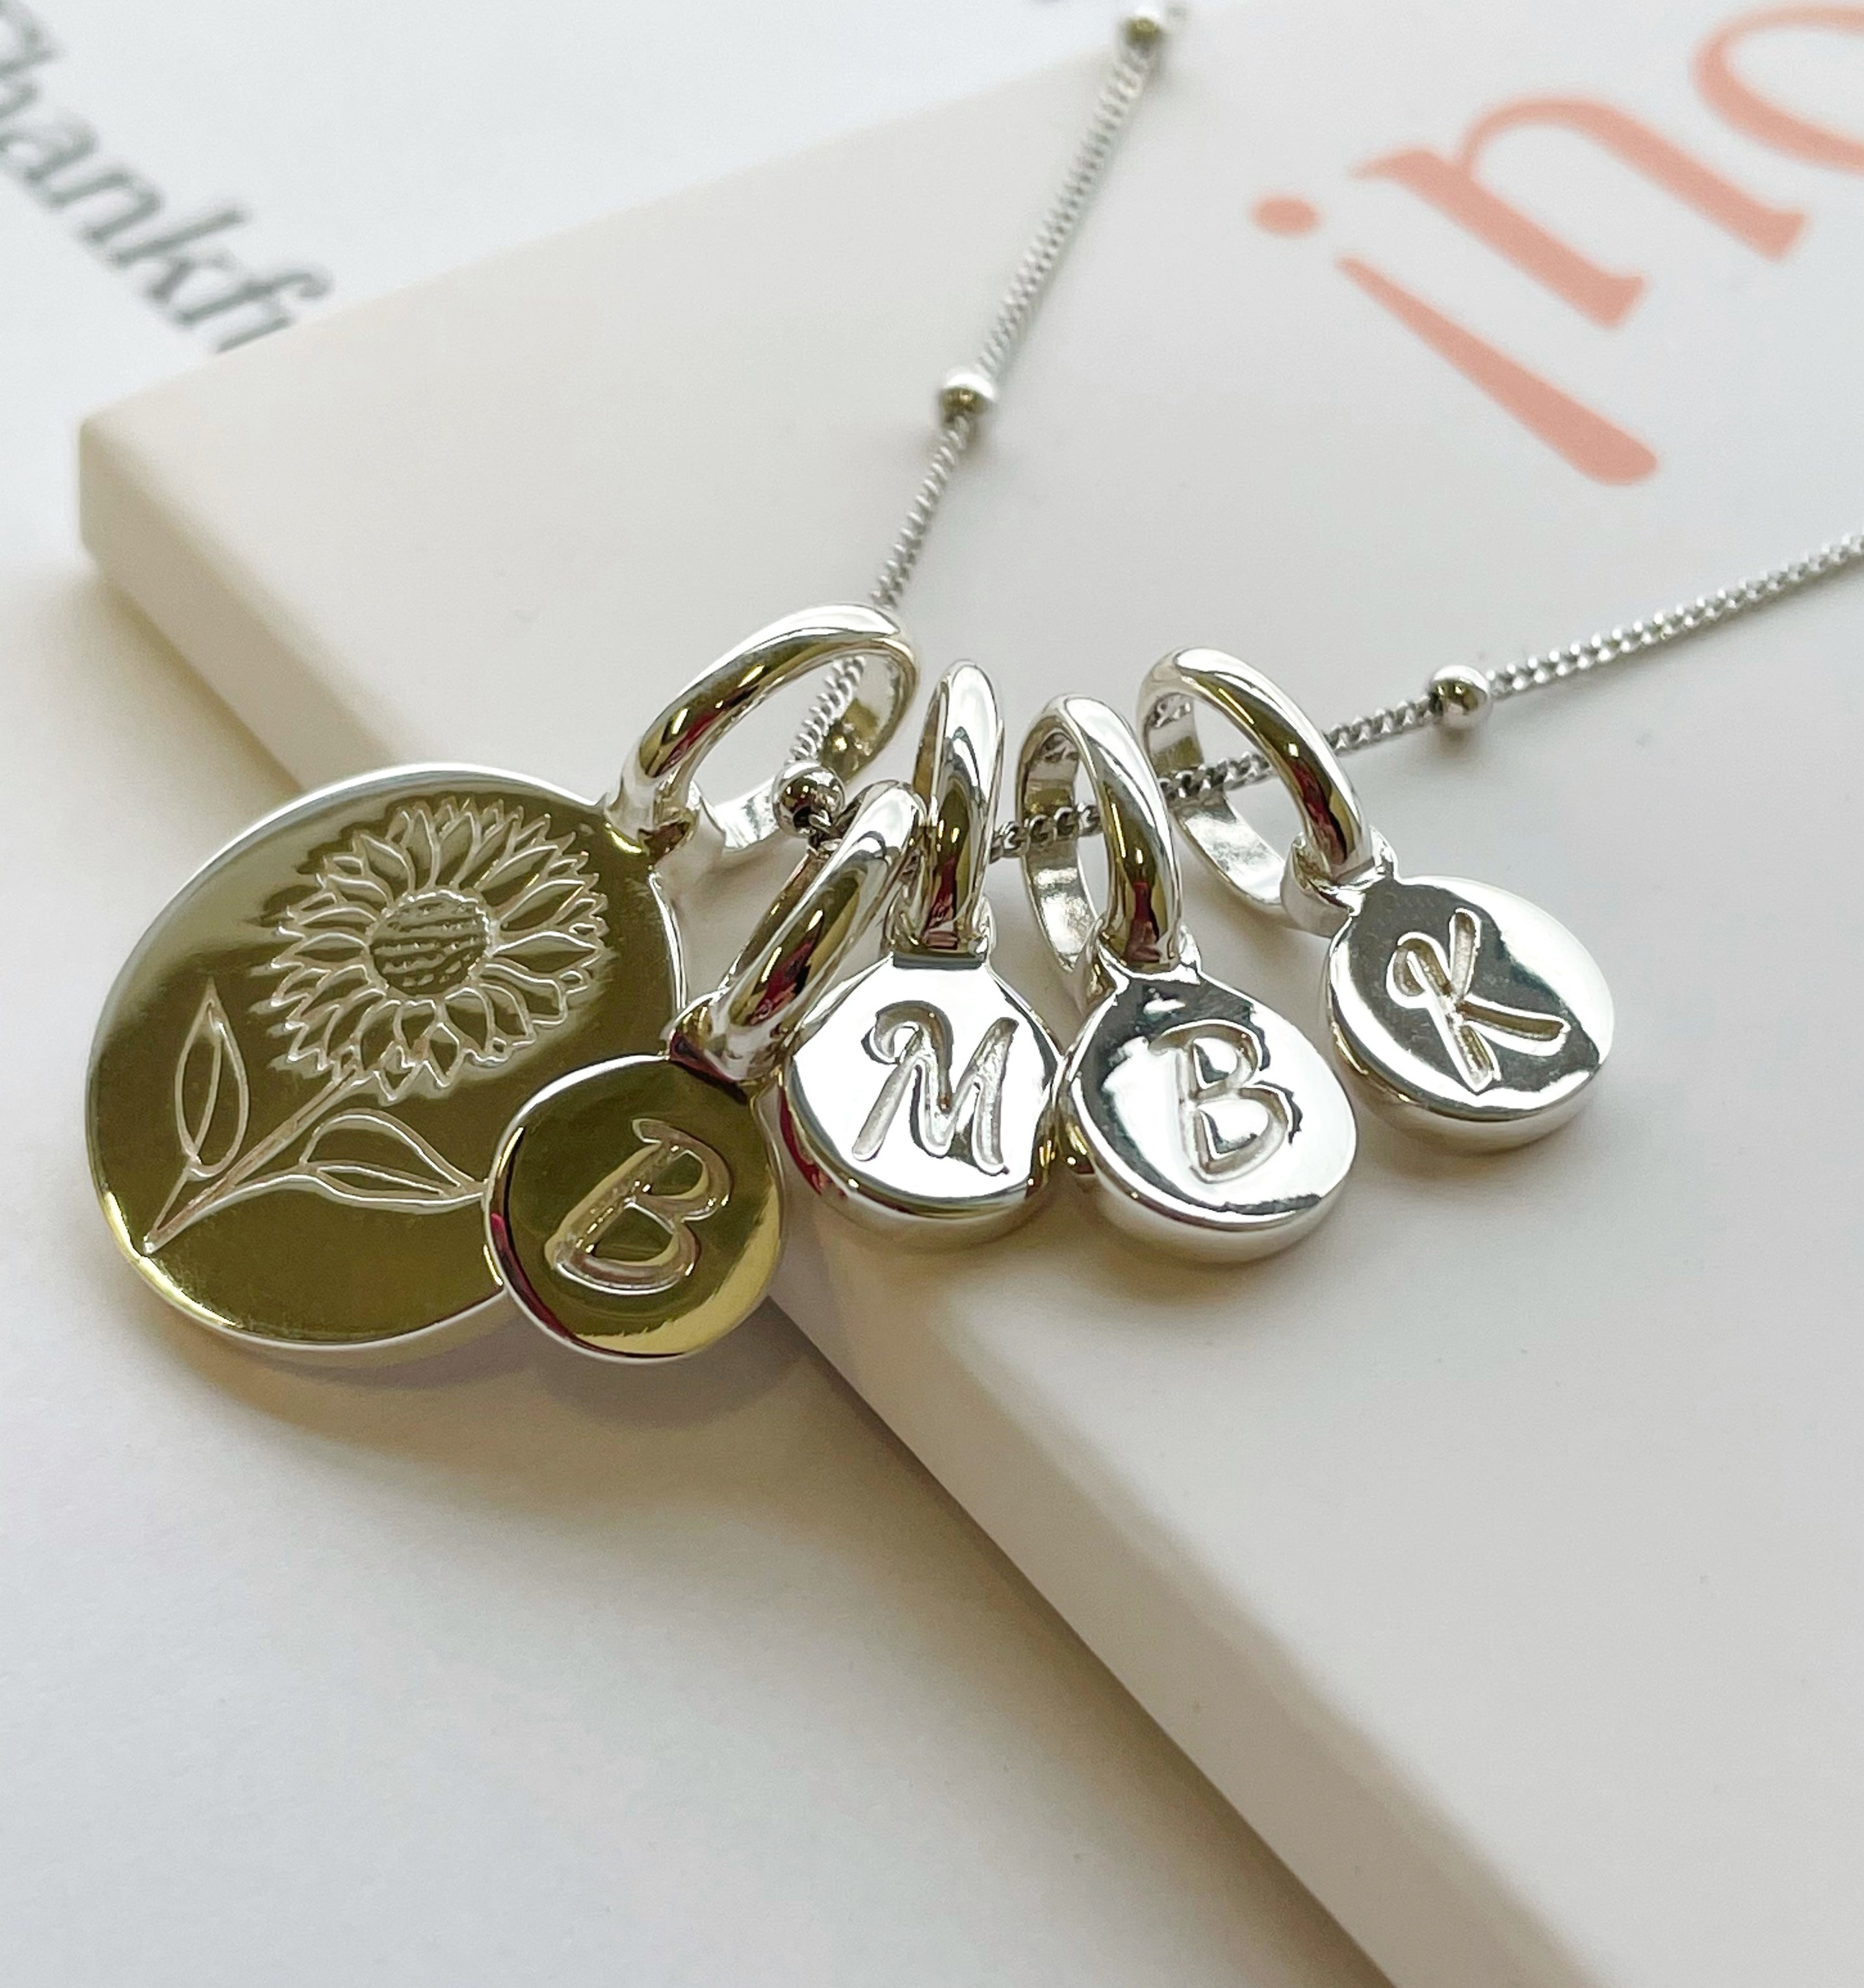 Marigold Initial Necklace - October Flower